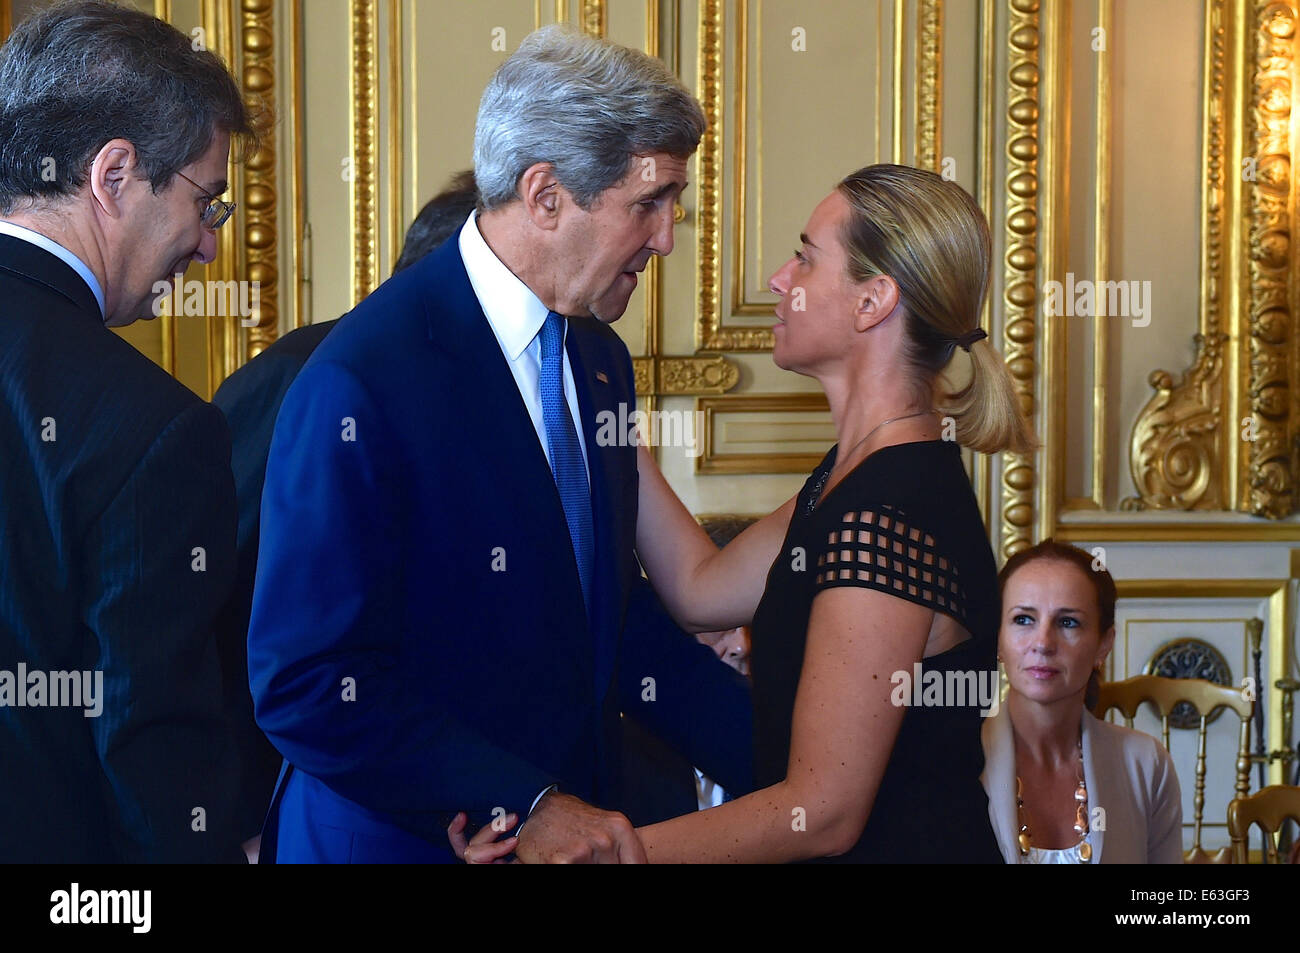 U.S. Secretary of State John Kerry greets Italian Foreign Minister Federica Mogherini at the Quai d'Orsay in Paris, France, on July 26, 2014, before a meeting with a series of international partners seeking a cease-fire in the fighting between Israel and Stock Photo